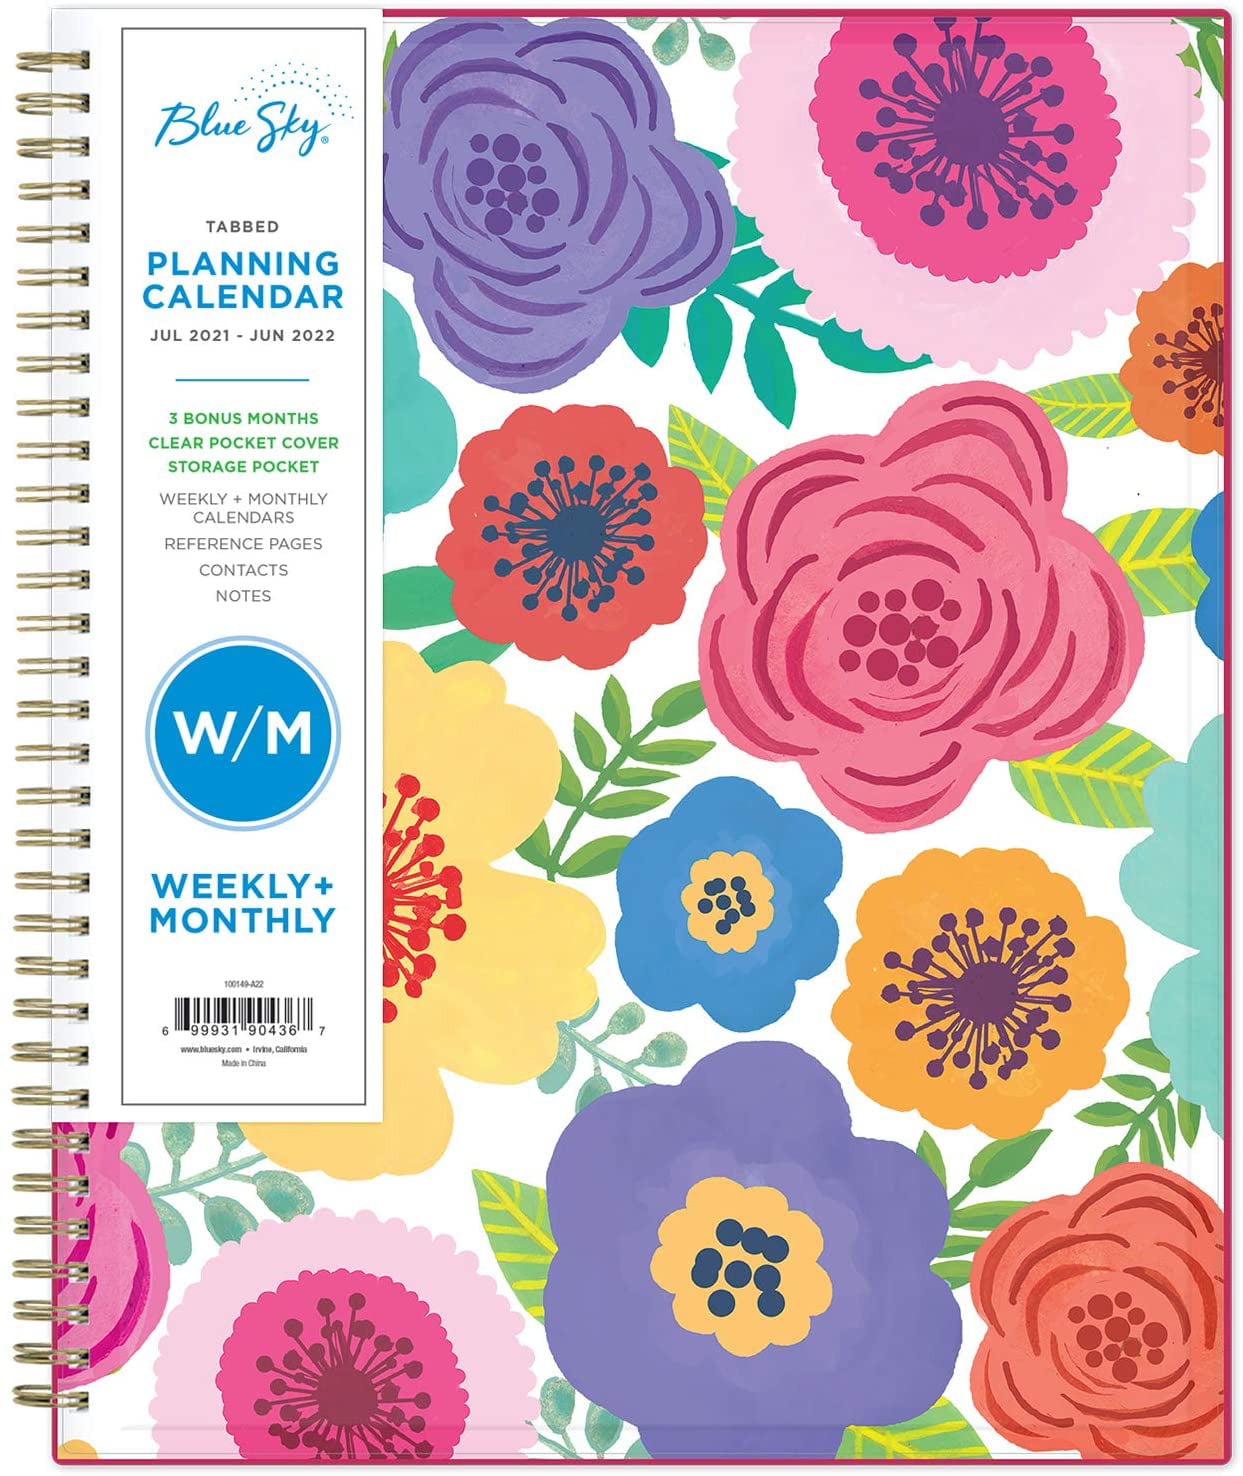 Daily See It Bigger Planner 2019-2020 Calendar 8.5"x11" Weekly & Monthly ... 